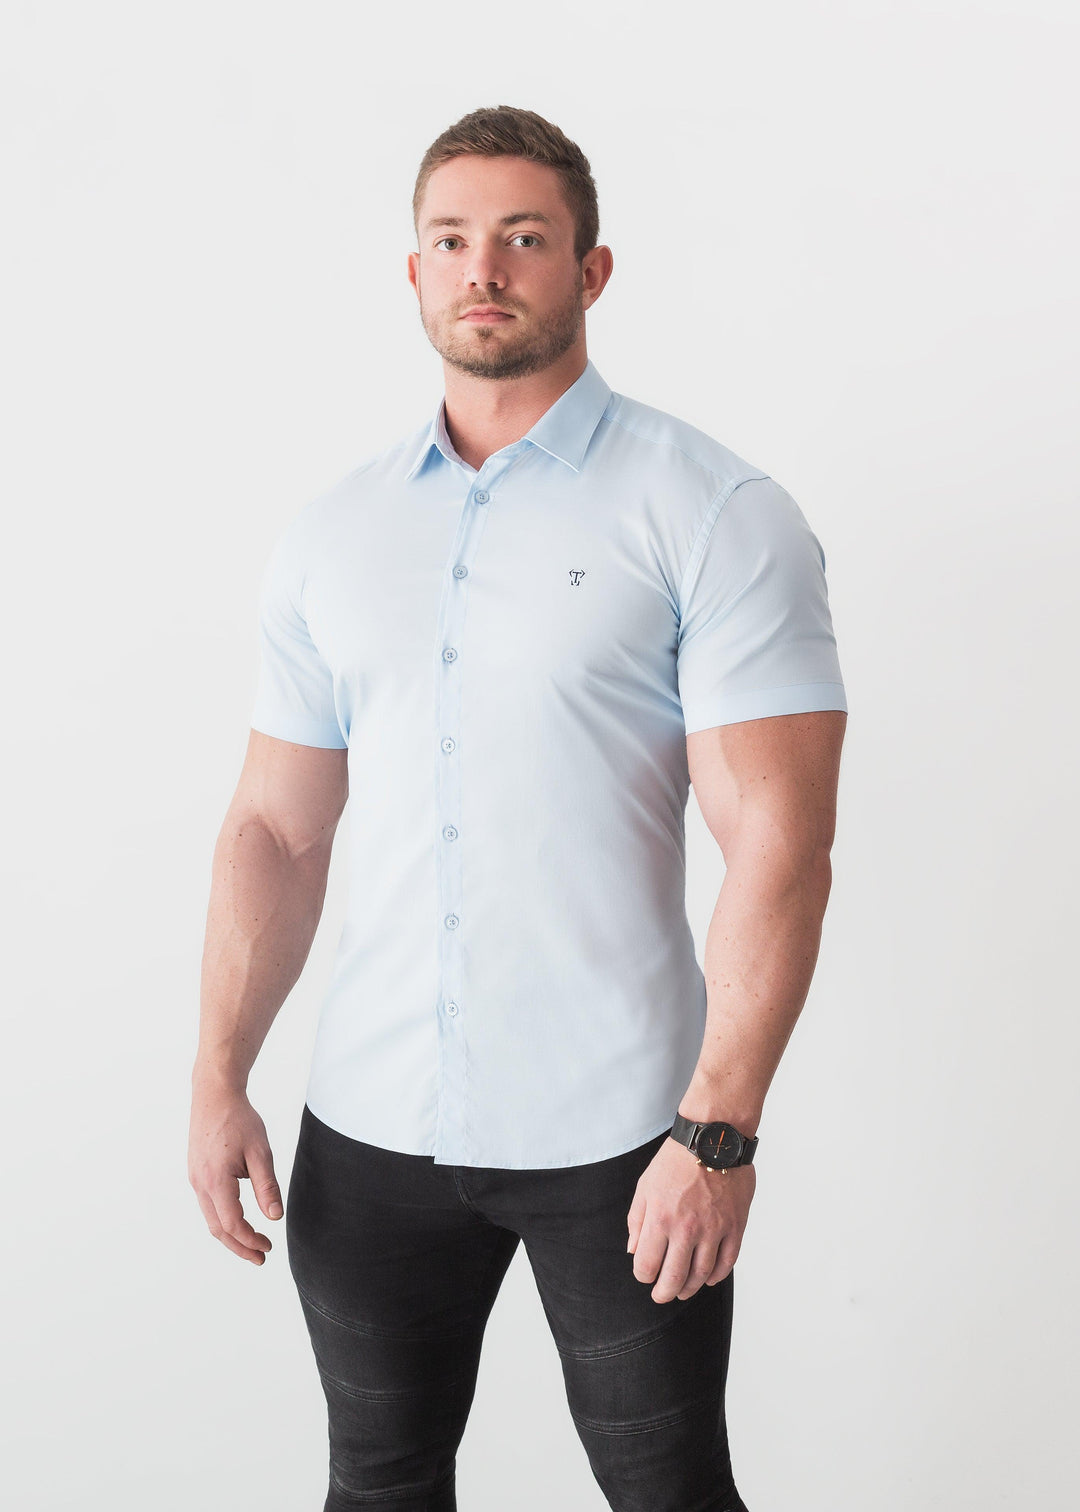 Blue Short Sleeve Tapered Fit Shirt For Men. A Proportionally Fitted and Comfortable Short Sleeve Muscle Fit Shirt. Best Shirts For a Muscular Build